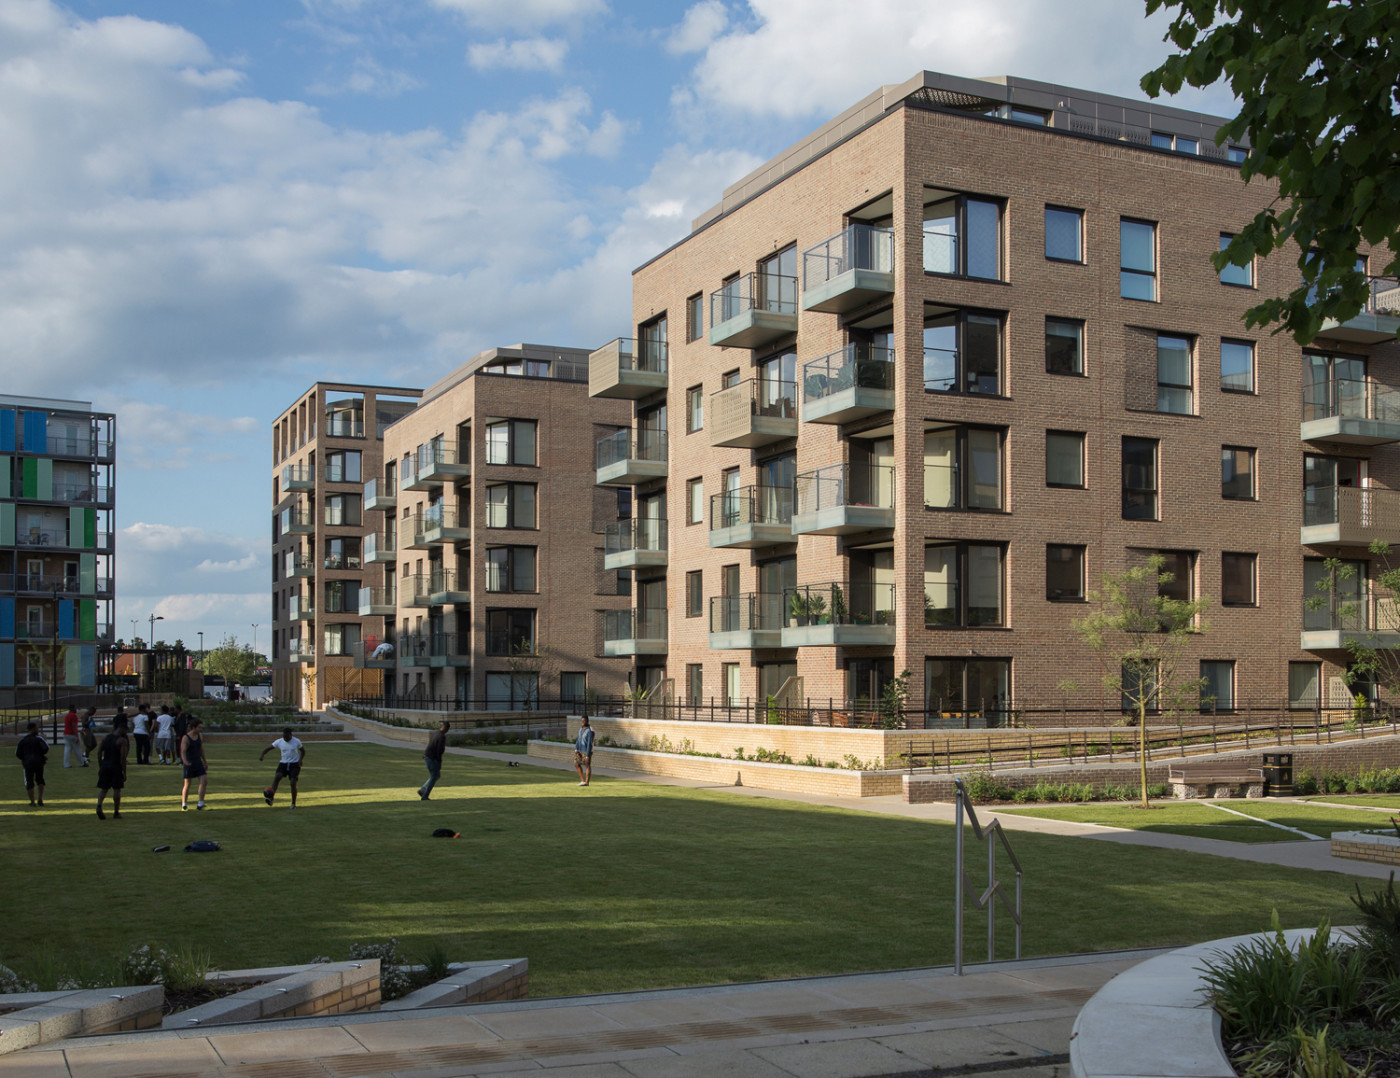 A Sustainable Approach to Housing on Brownfield